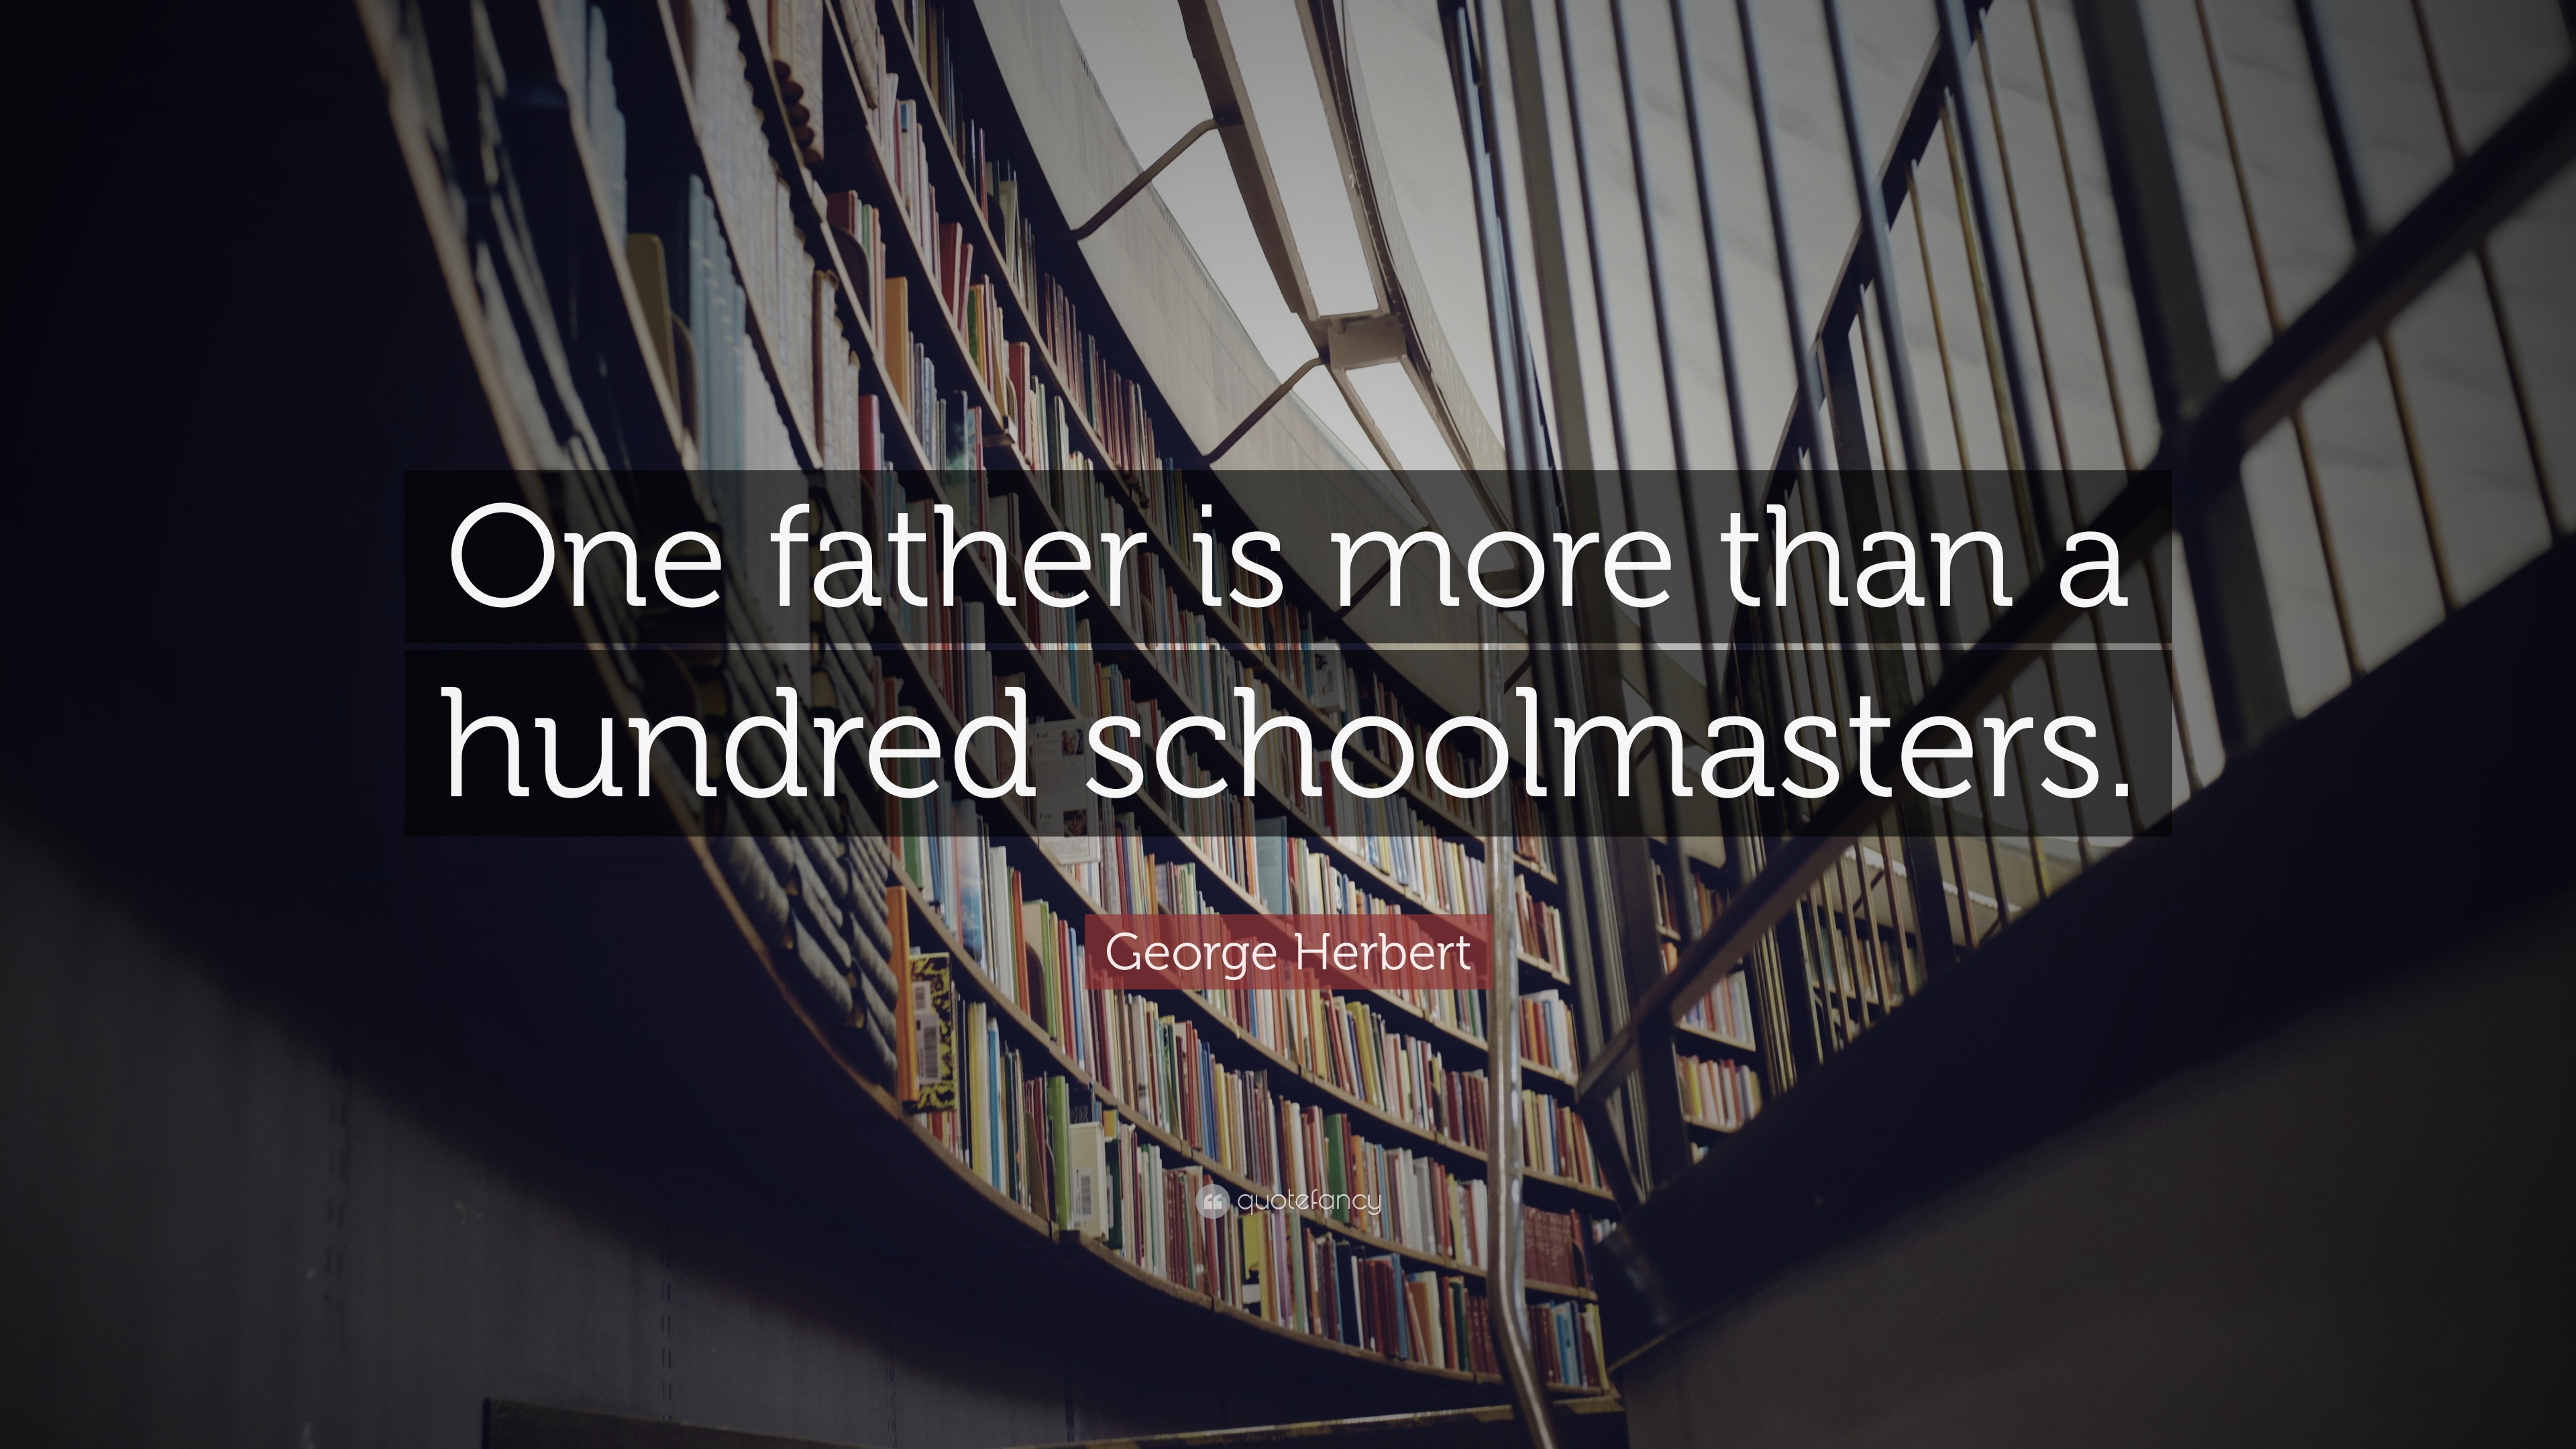 Top 10 Books by Fathers